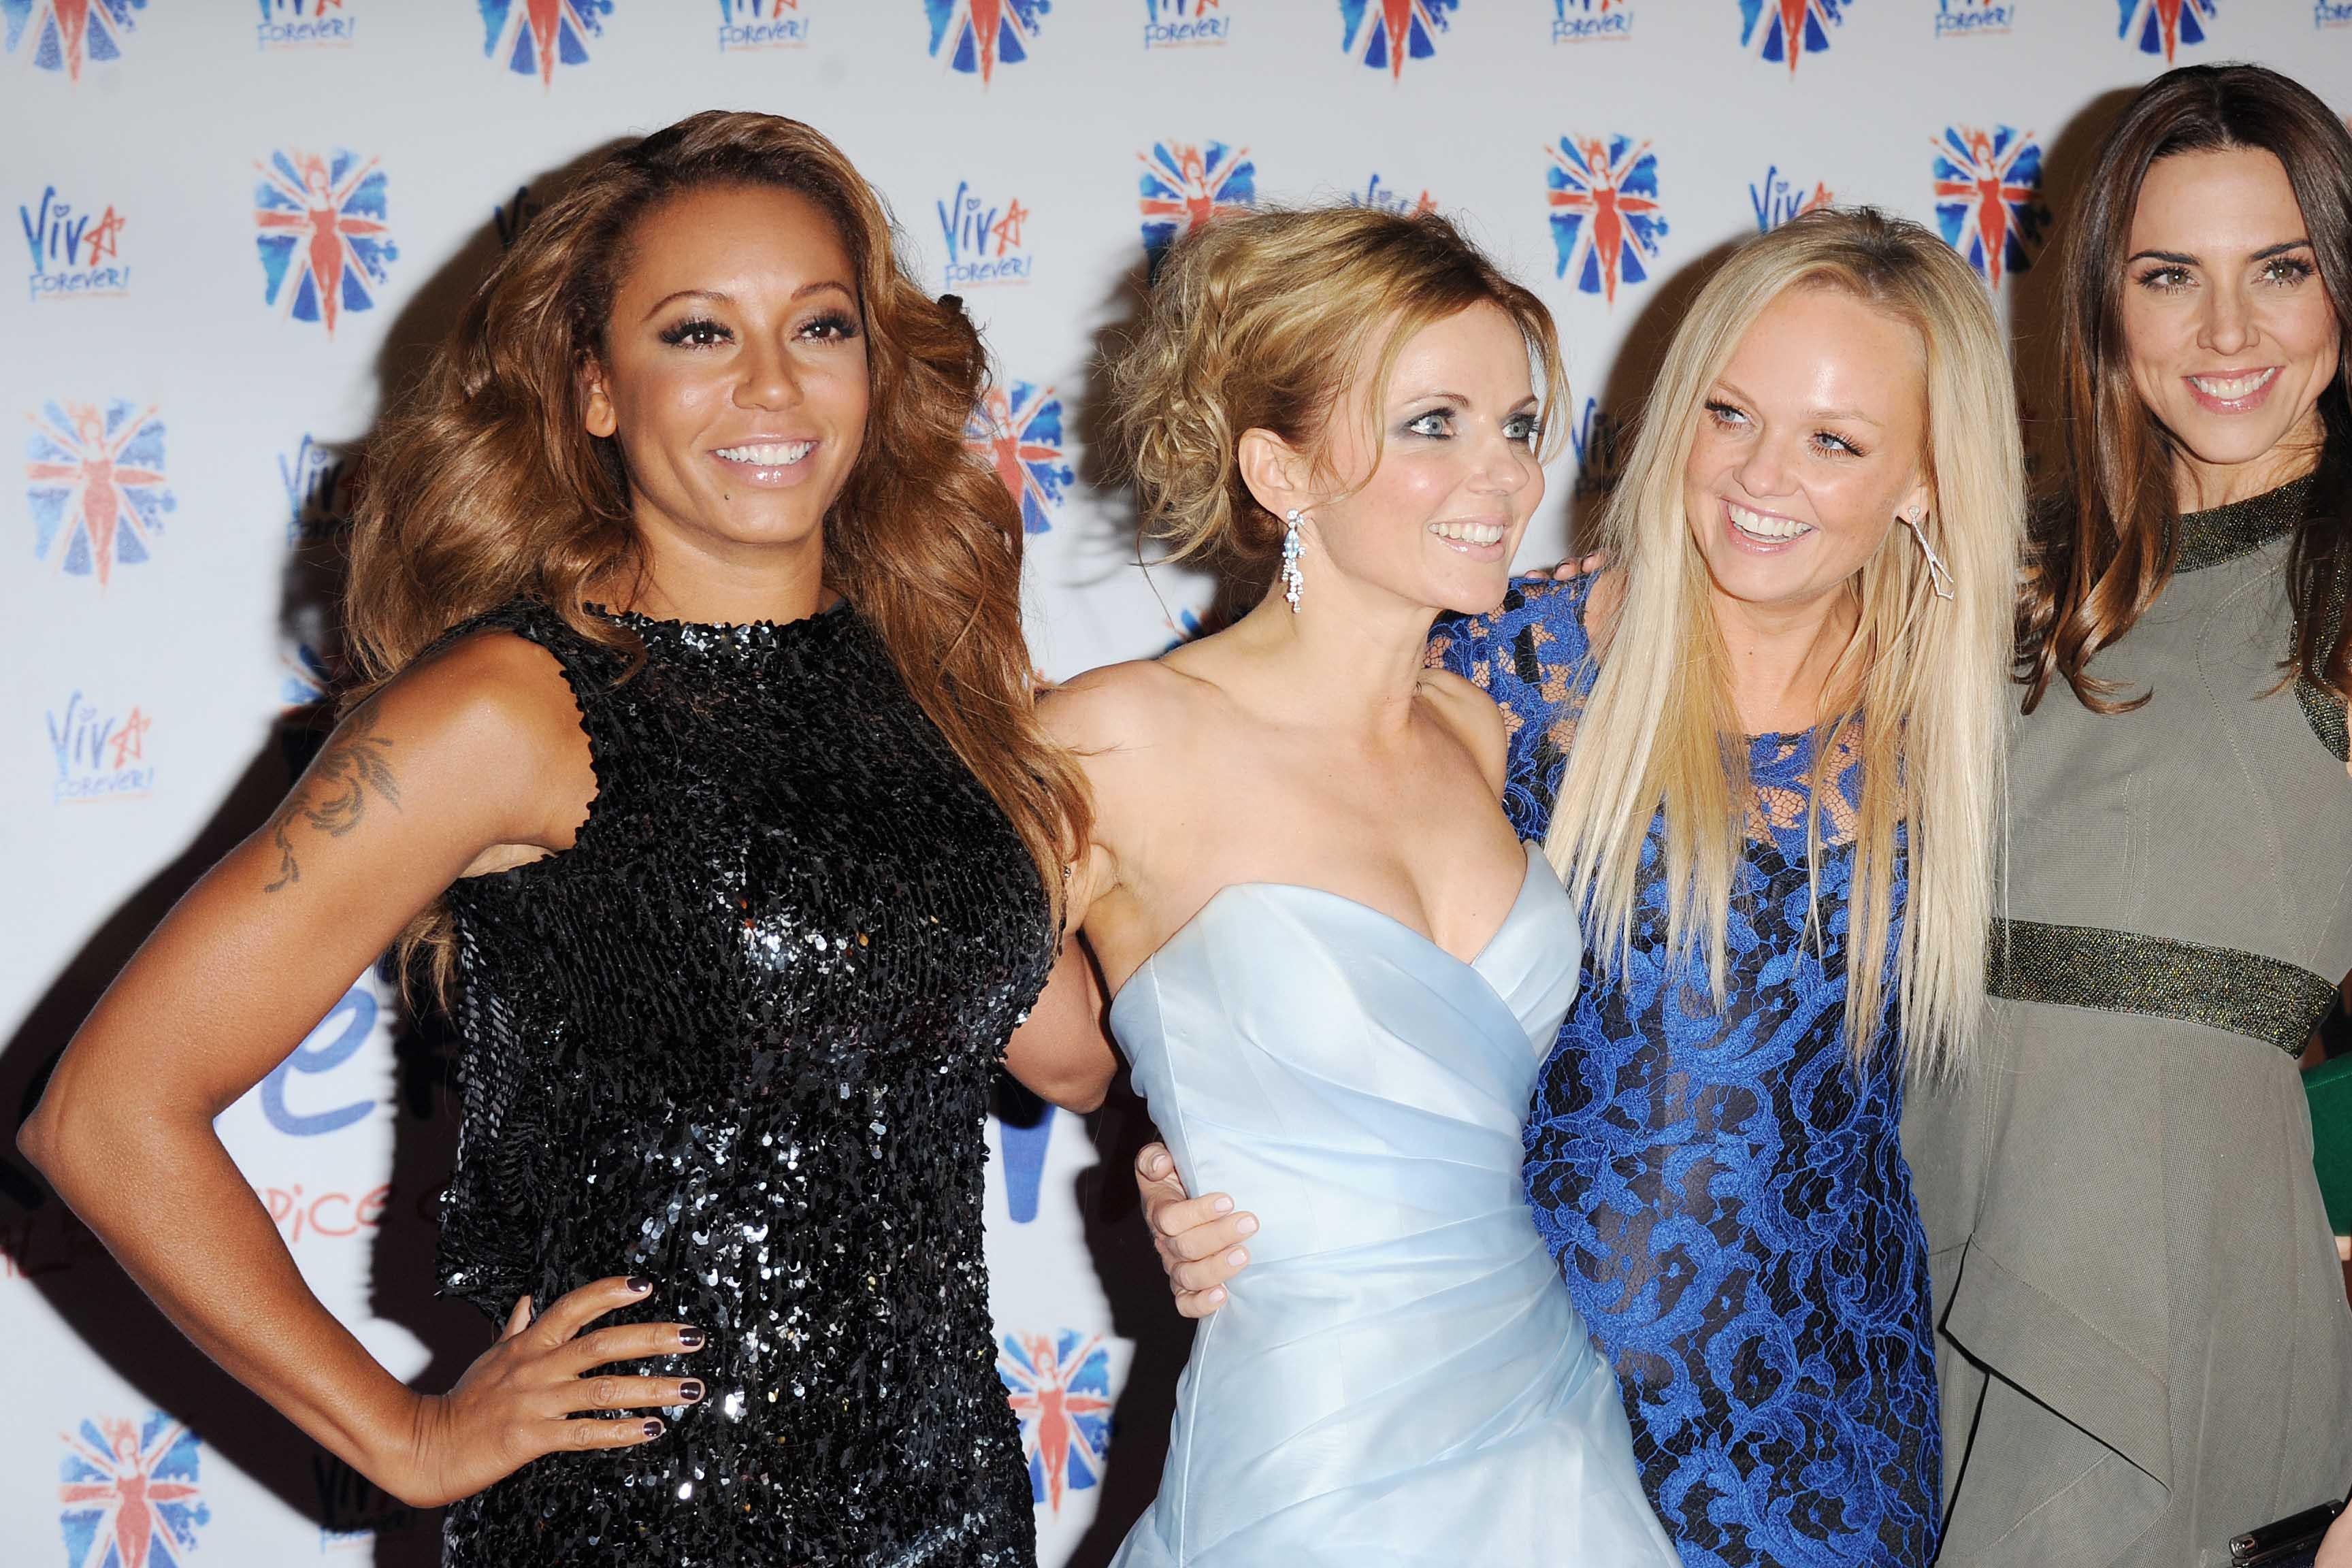 LONDON, UNITED KINGDOM - DECEMBER 11: Melanie Brown, Geri Halliwell, Emma Bunton and Melanie Chisholm attend the after party for the press night of 'Viva Forever', a musical based on the music of The Spice Girls at Victoria Embankment Gardens on December 11, 2012 in London, England. (Photo by Stuart Wilson/Getty Images)